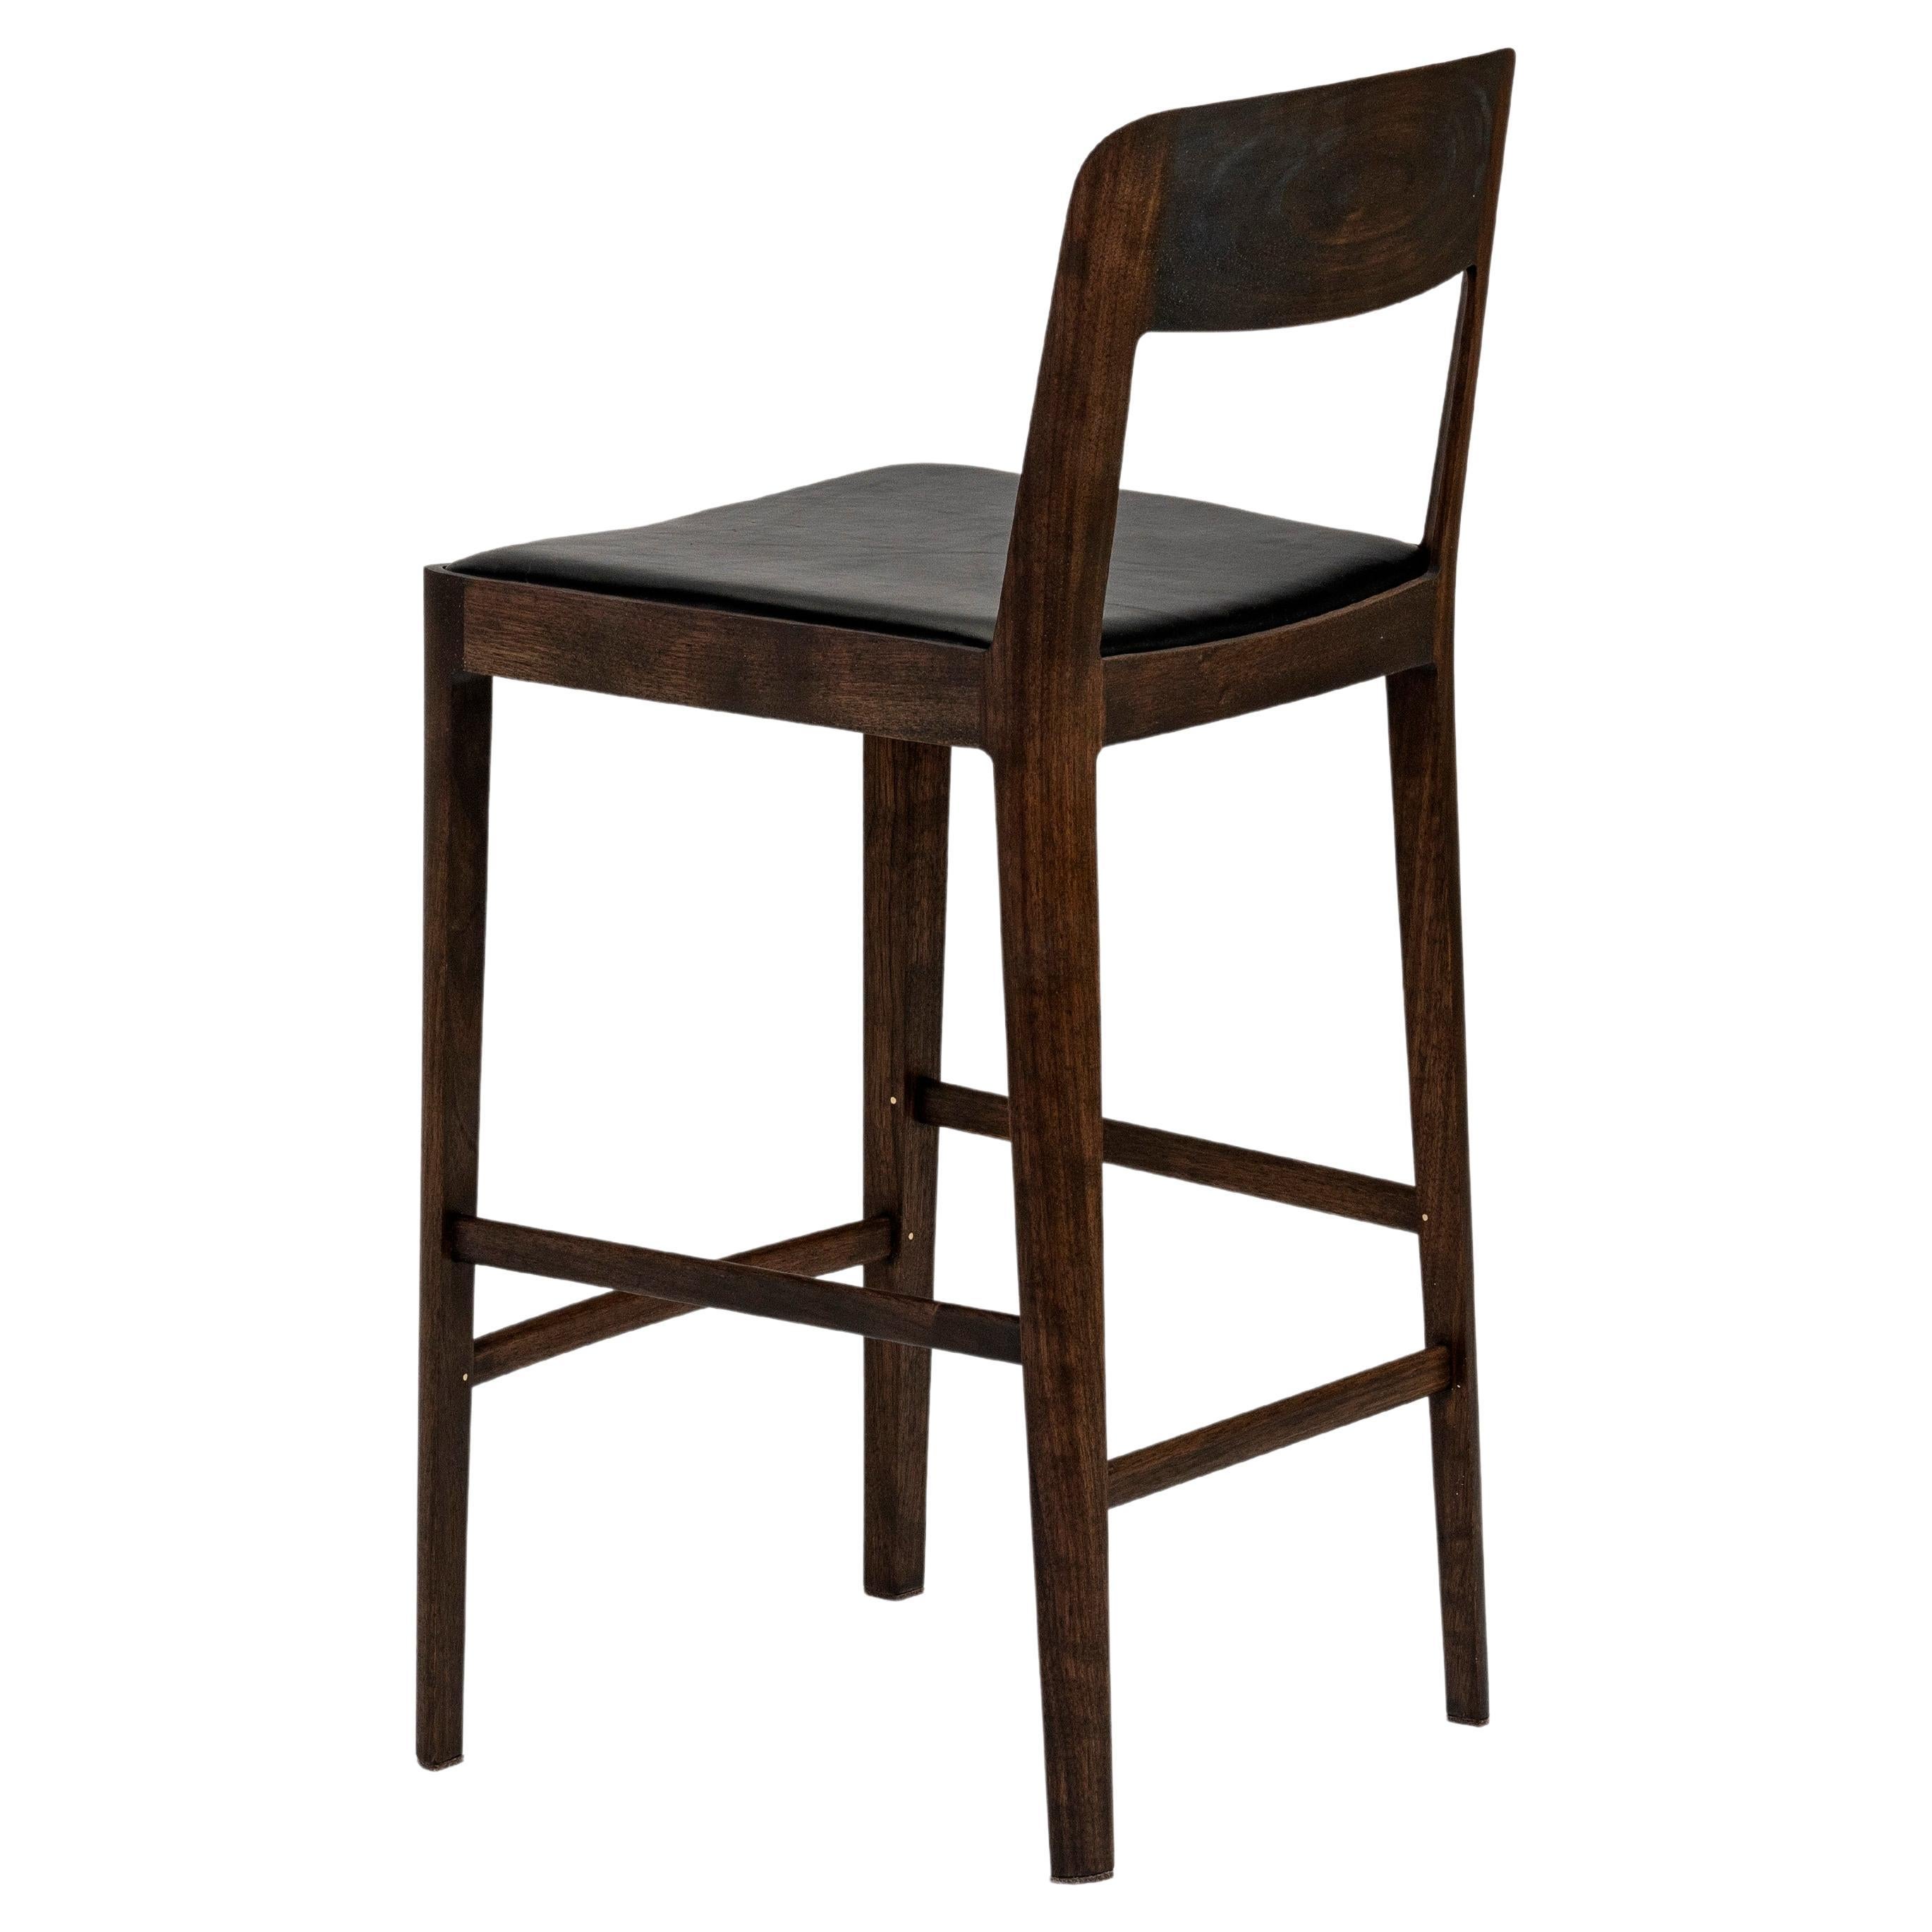 Linea Barstool, Walnut with Upholstered Seat and Backrest in Leather (Black) For Sale